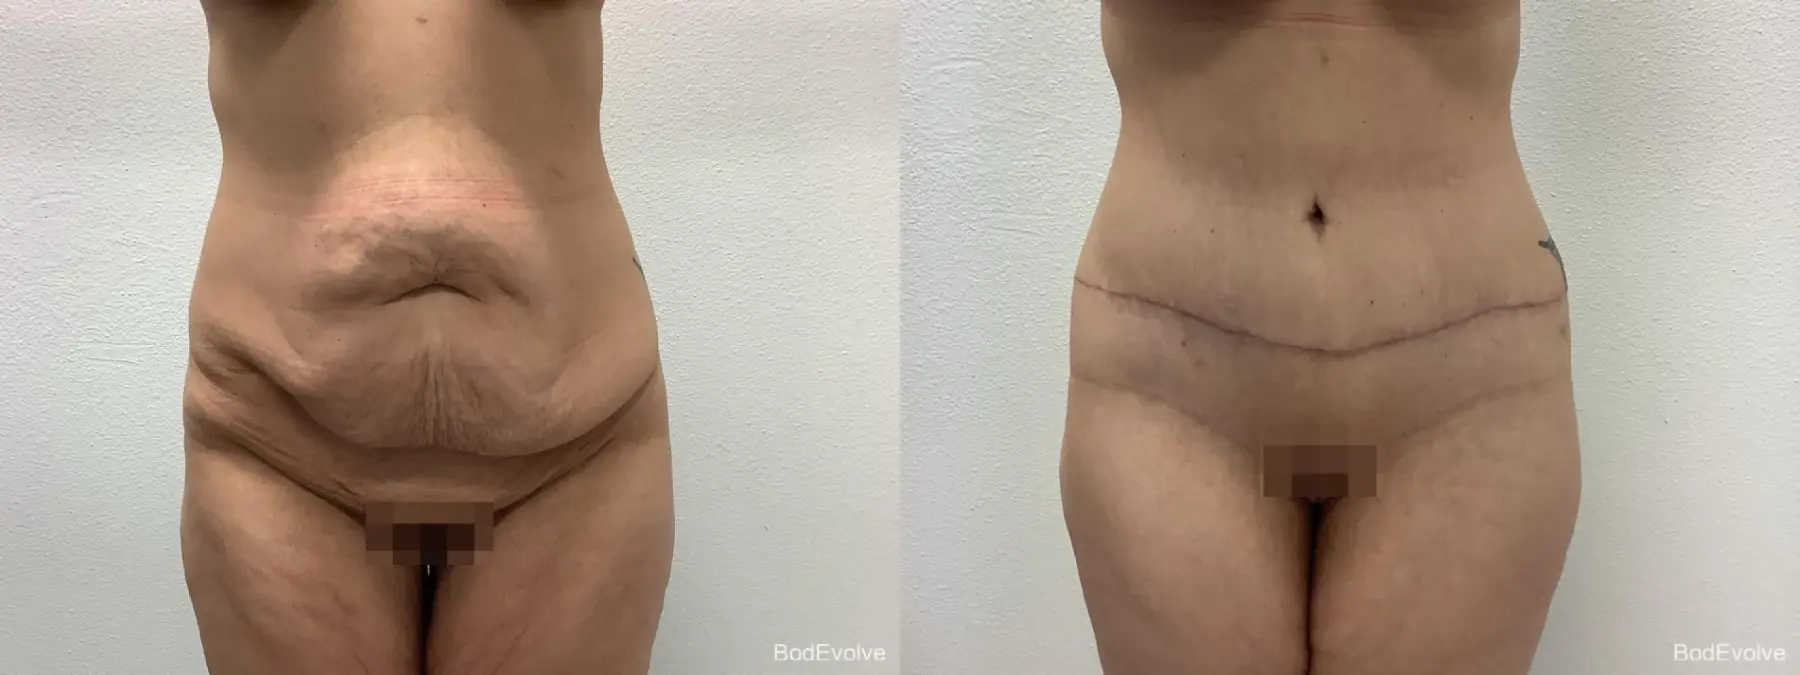 Tummy Tuck: Patient 1 - Before and After  